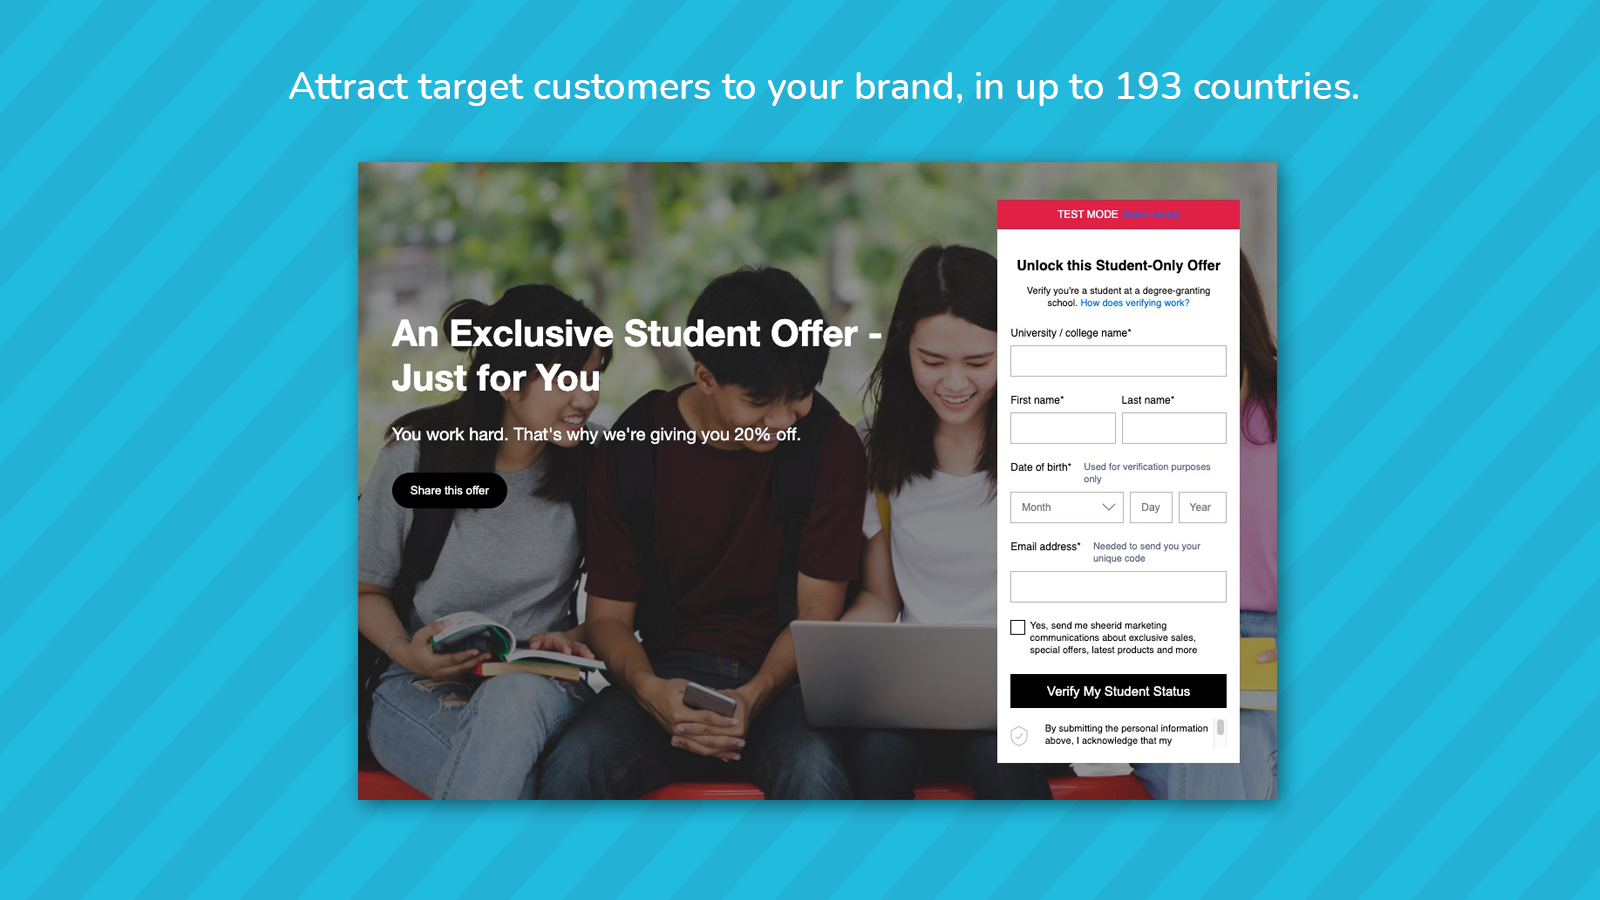  Attract target customers to your brand, in up to 193 countries